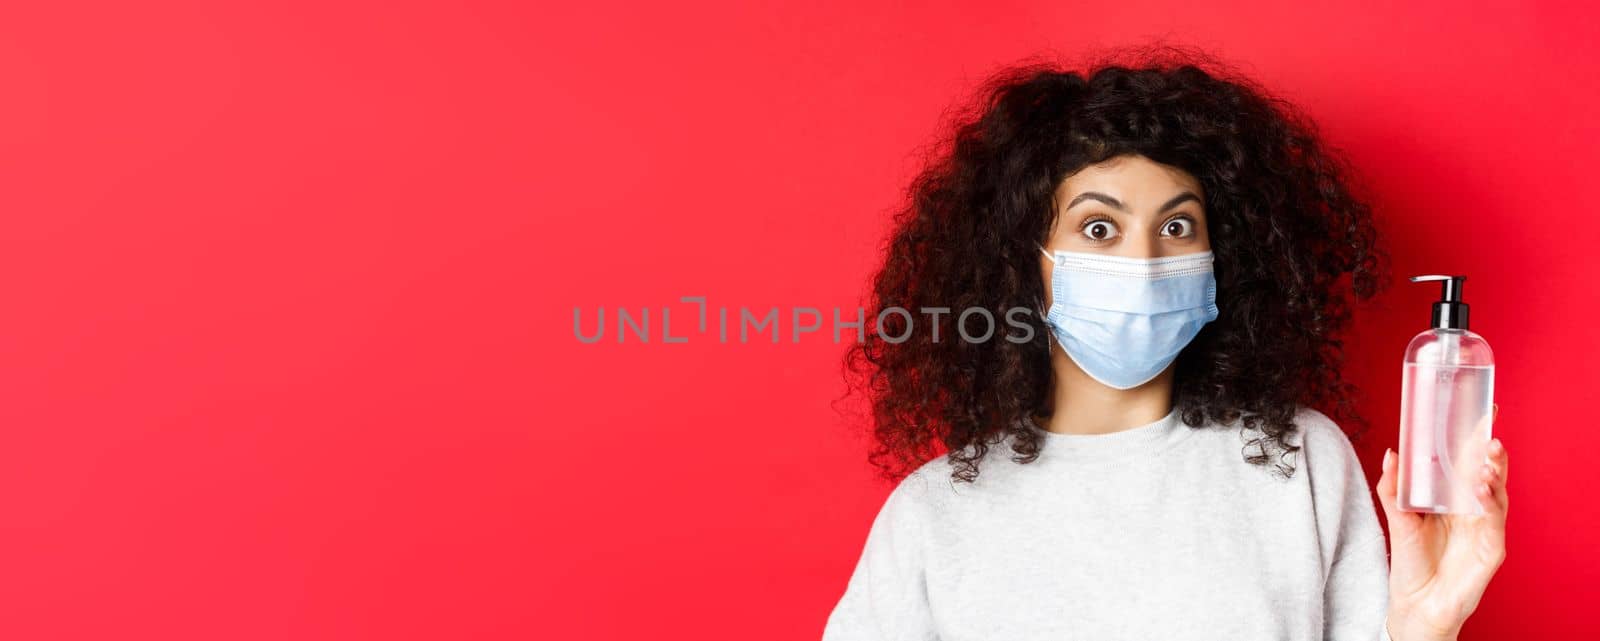 Covid-19, pandemic and quarantine concept. Excited girl with curly hair, wearing medical mask, showing bottle of hand sanitizer or antiseptic, standing on red background.